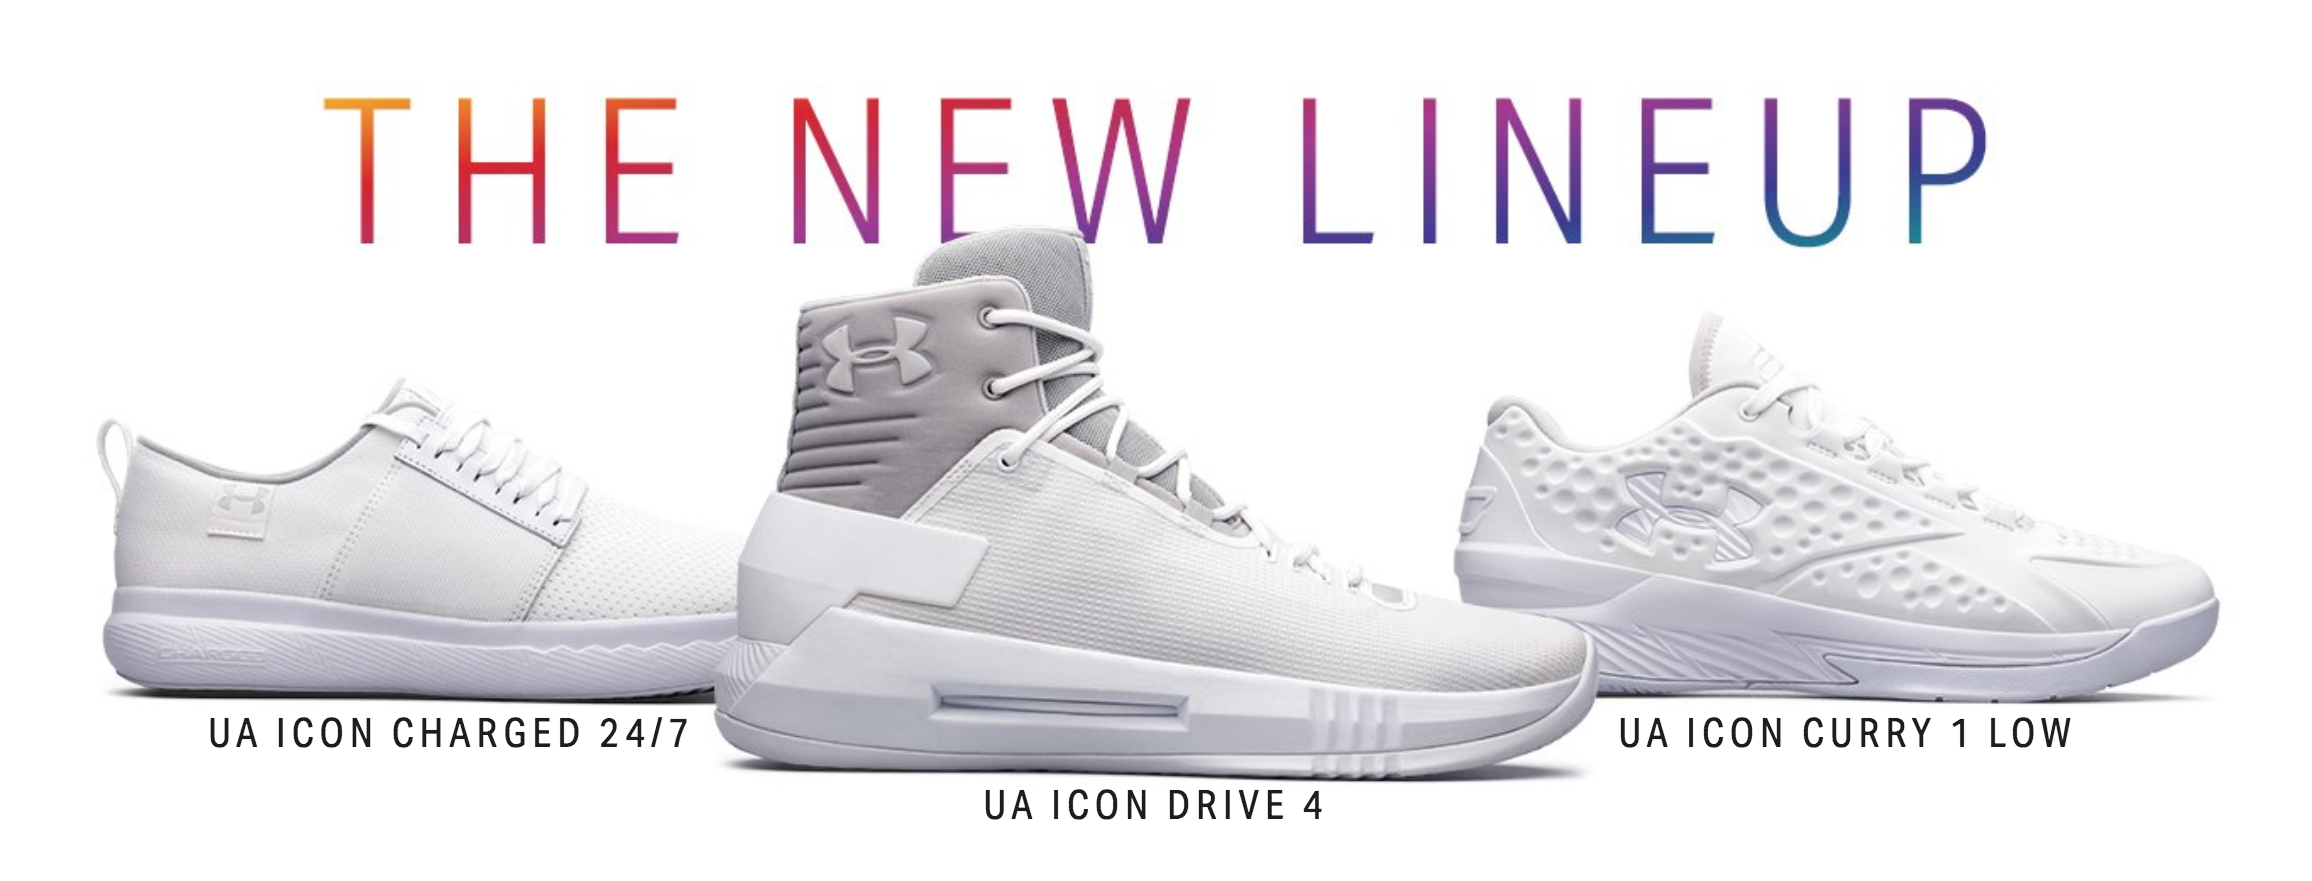 UA Icon curry 1 drive 4 charged 24 7